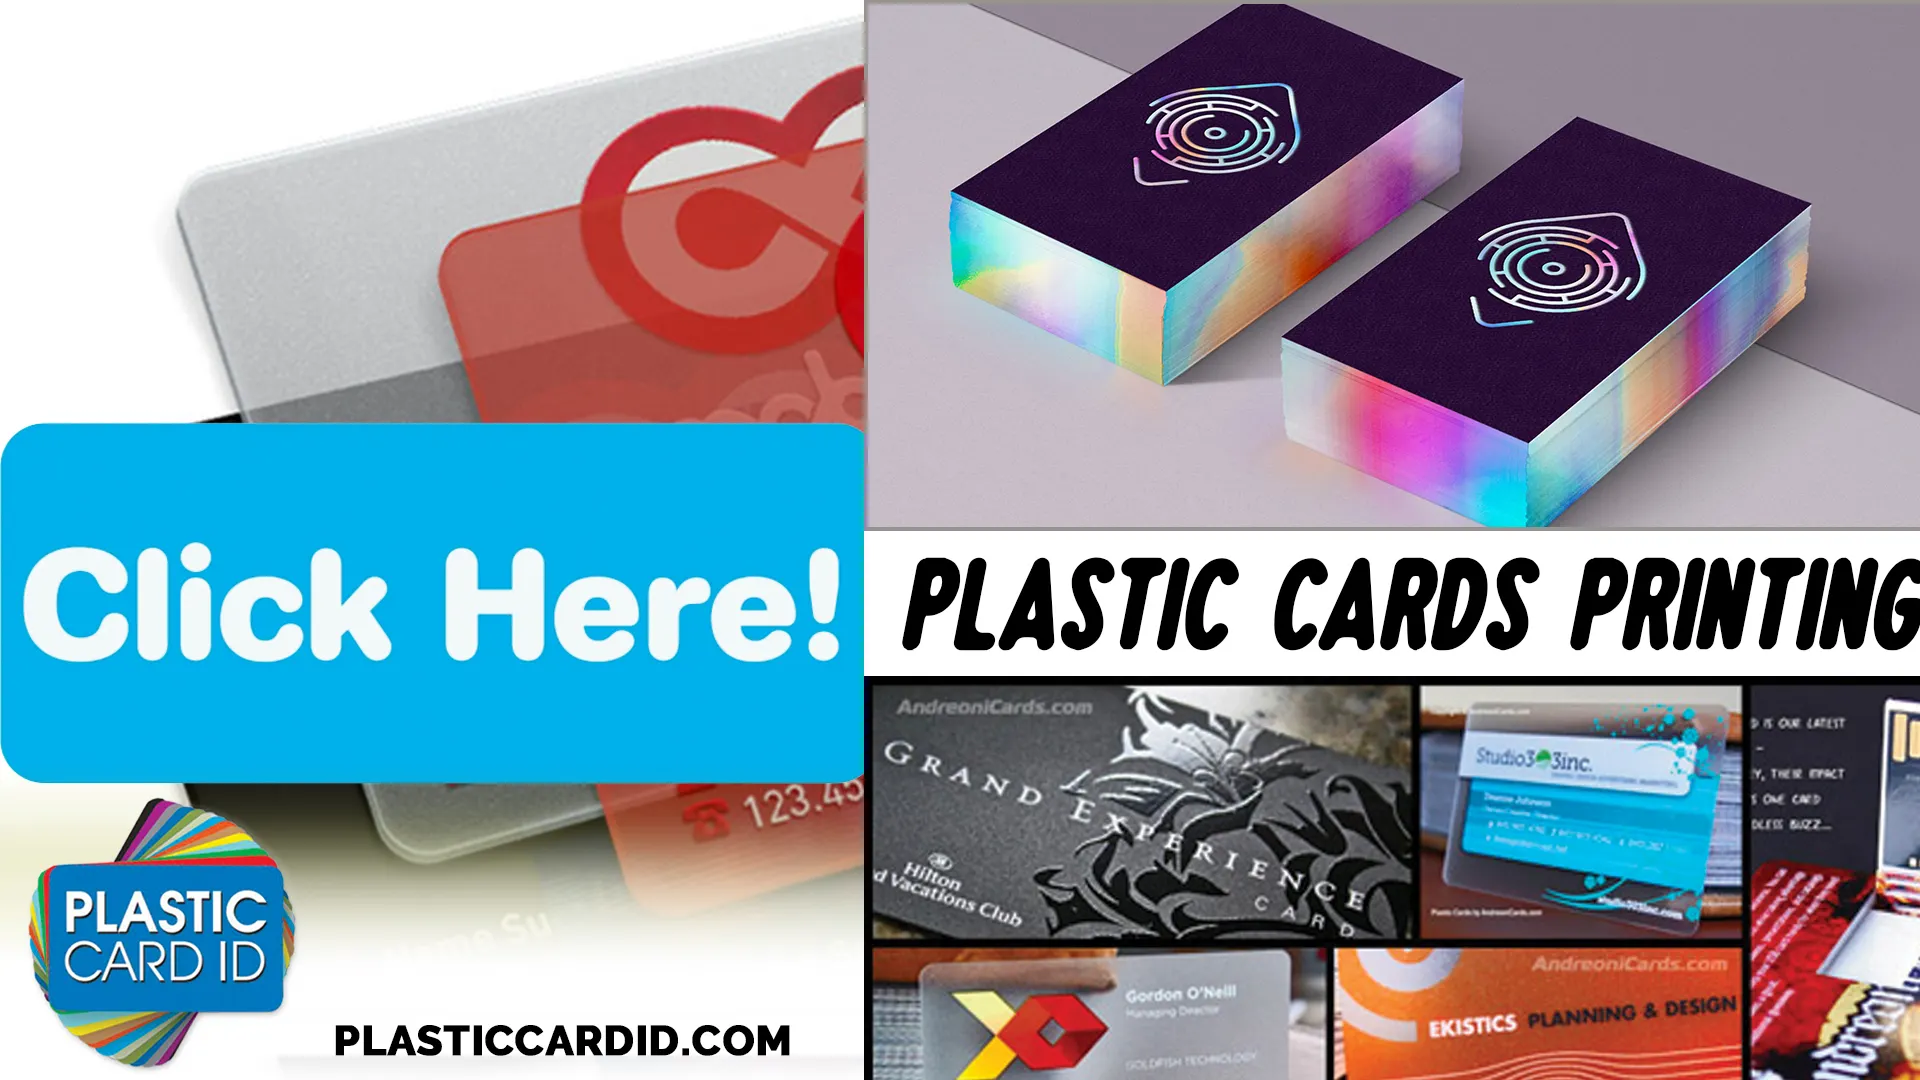 Inspiring Businesses Nationwide with Versatile Card Printing Solutions